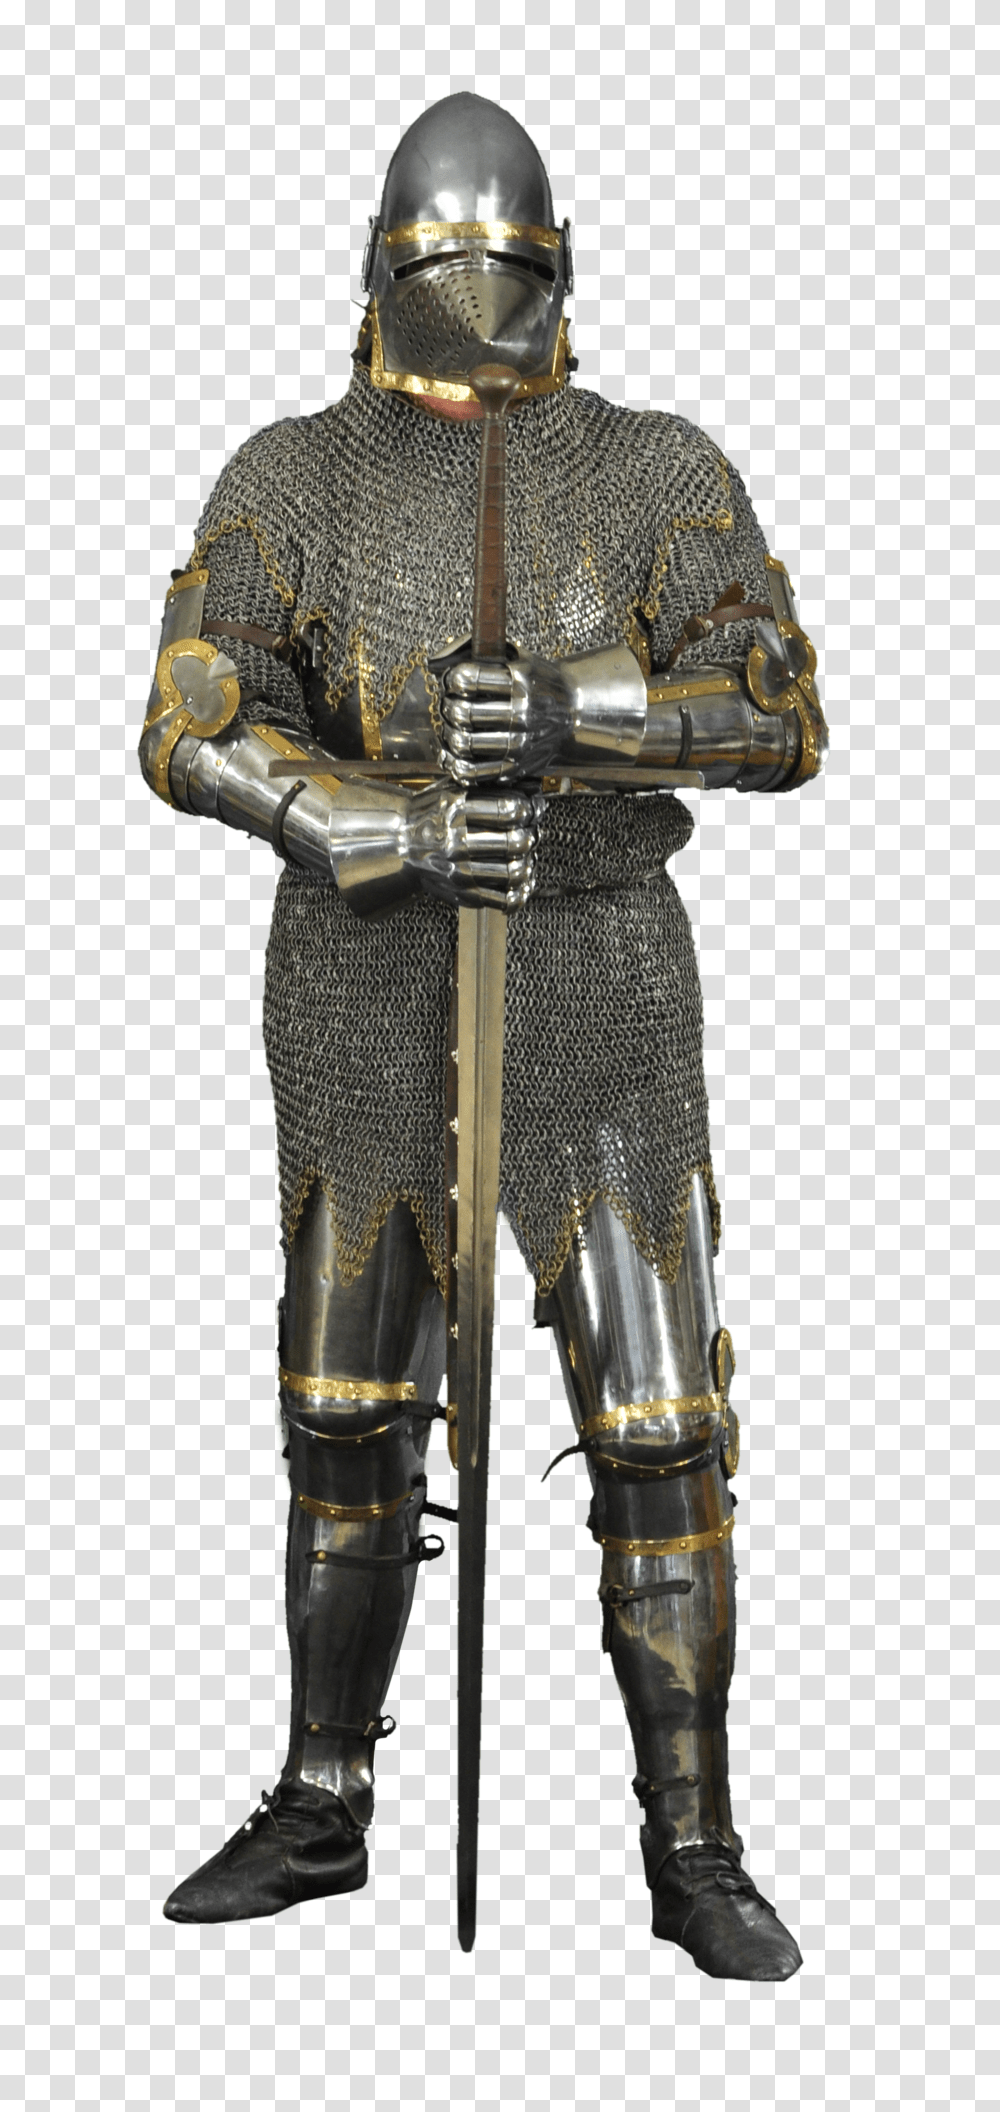 Armour Youtube Royale Fortnite Battle Medieval Knight, Armor, Helmet, Clothing, Apparel Transparent Png